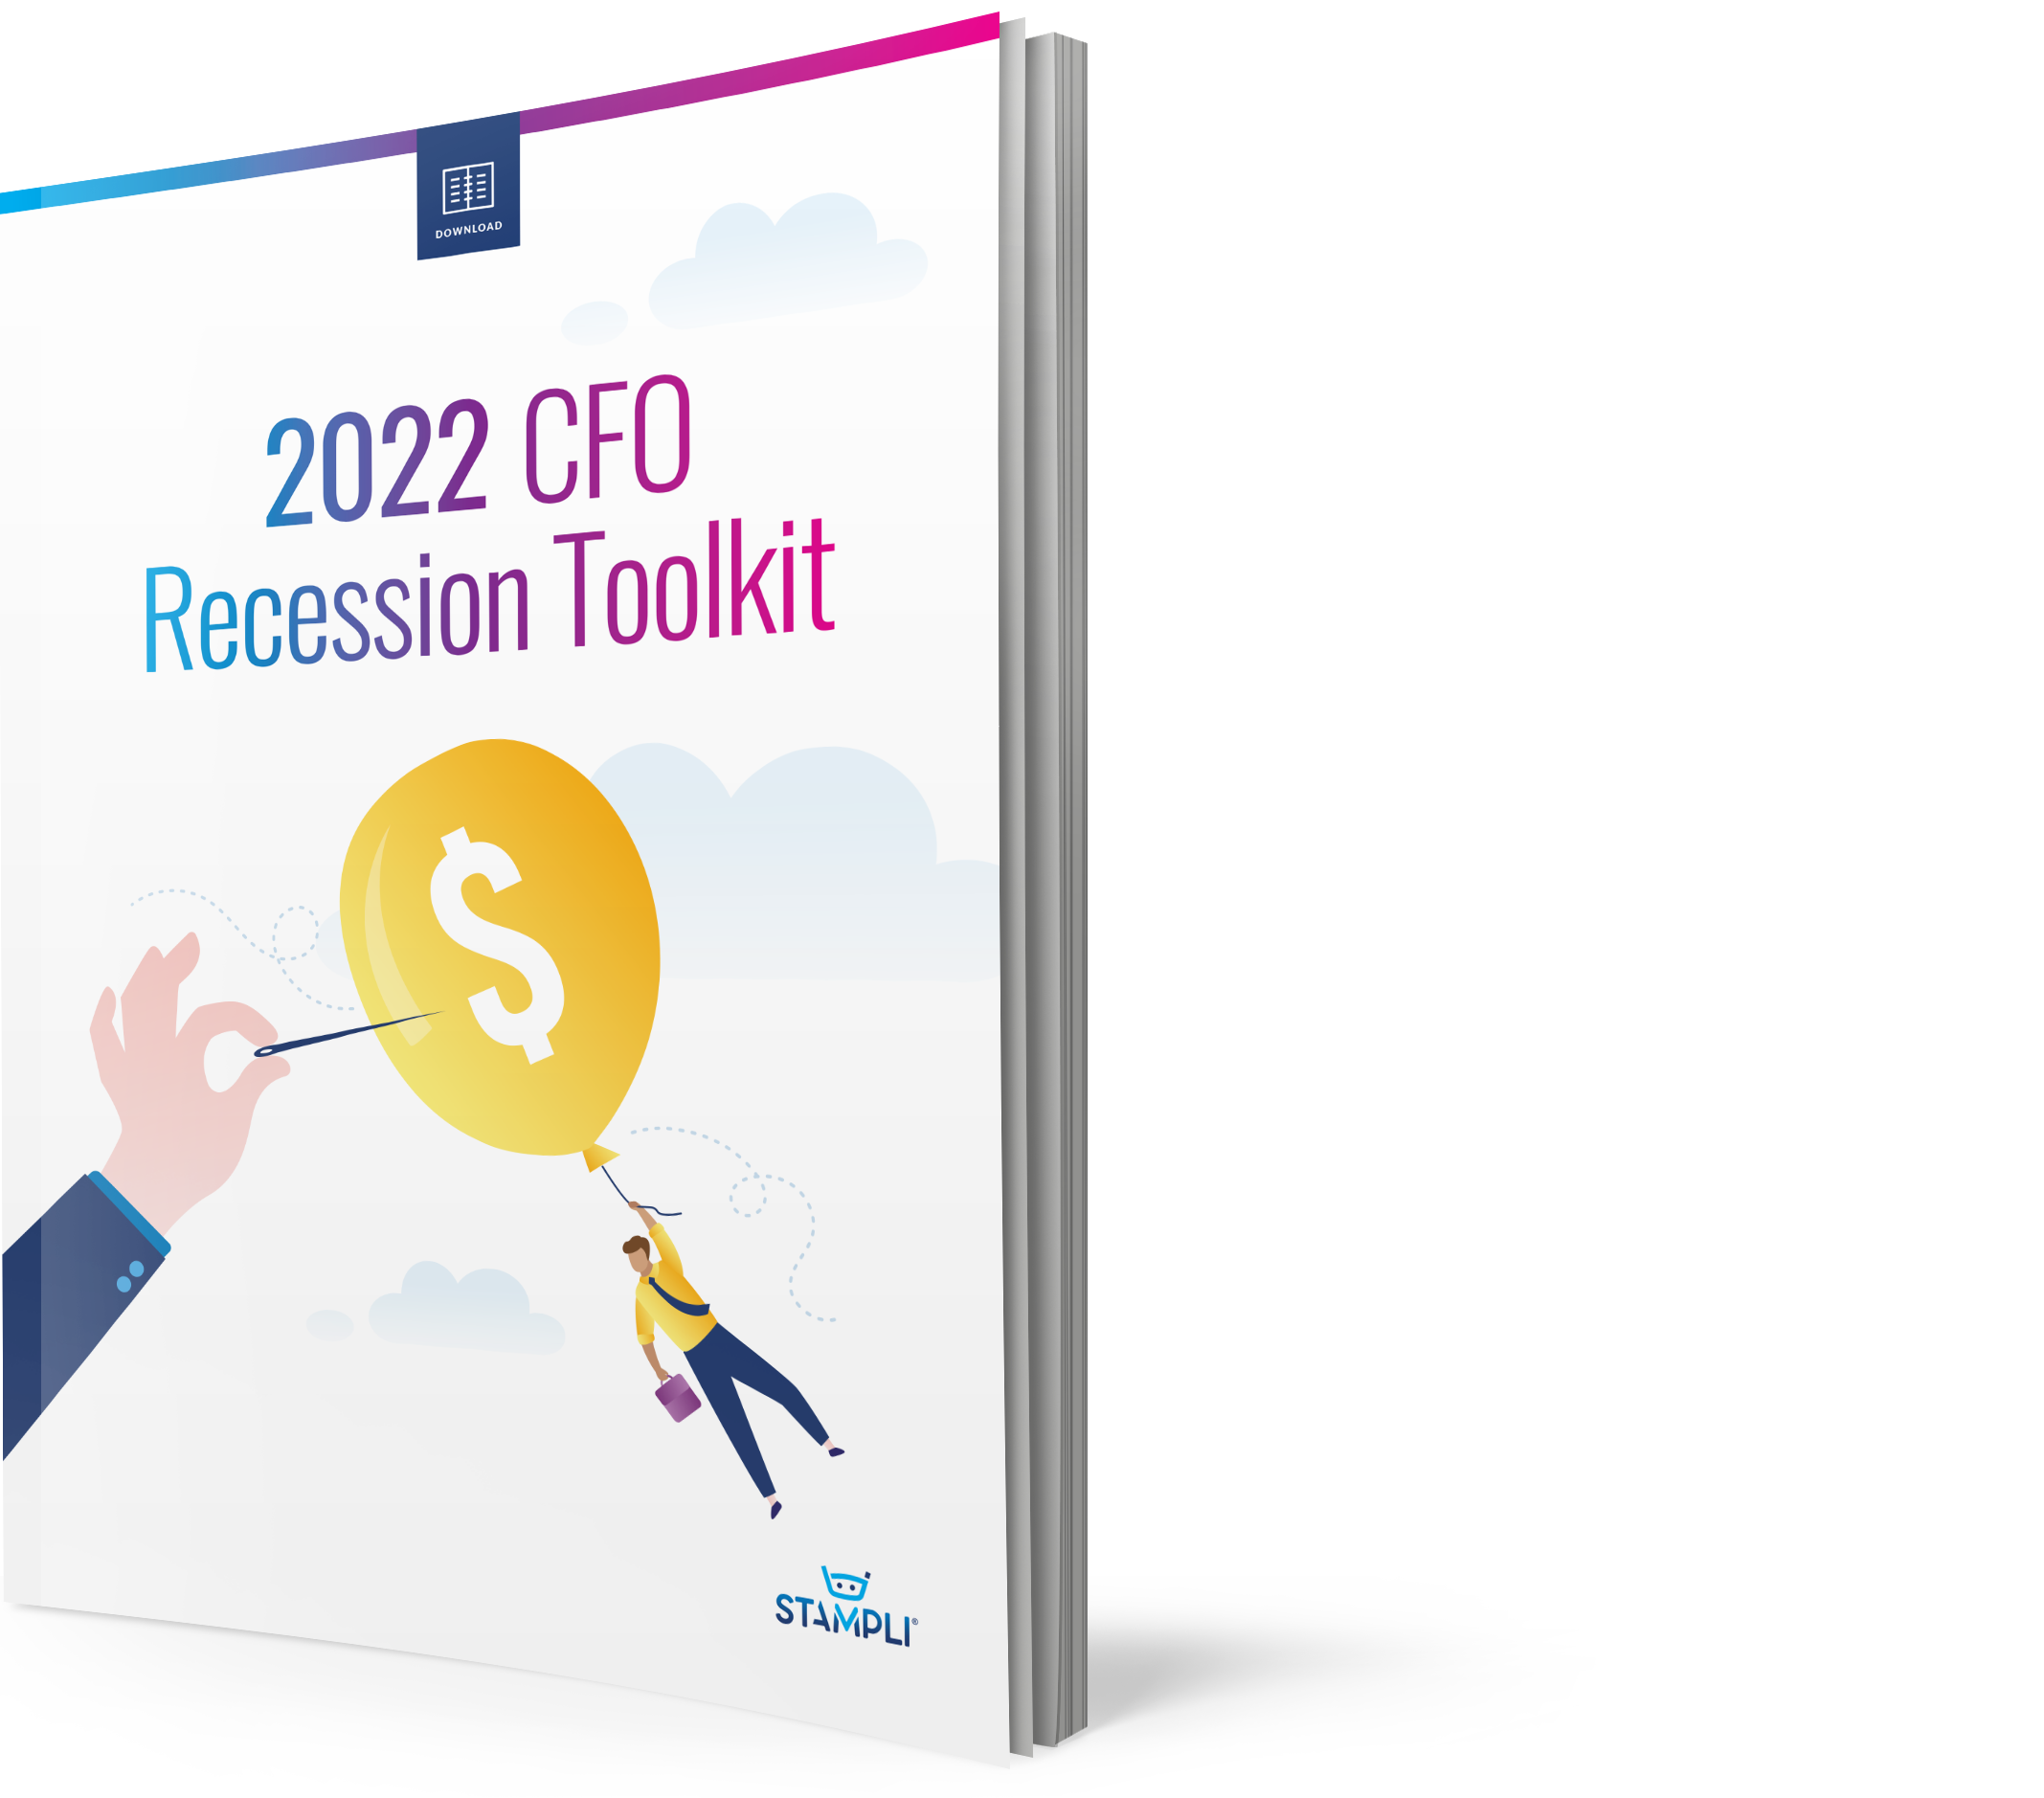 2022 CFO Recession Toolkit - cropped booklet